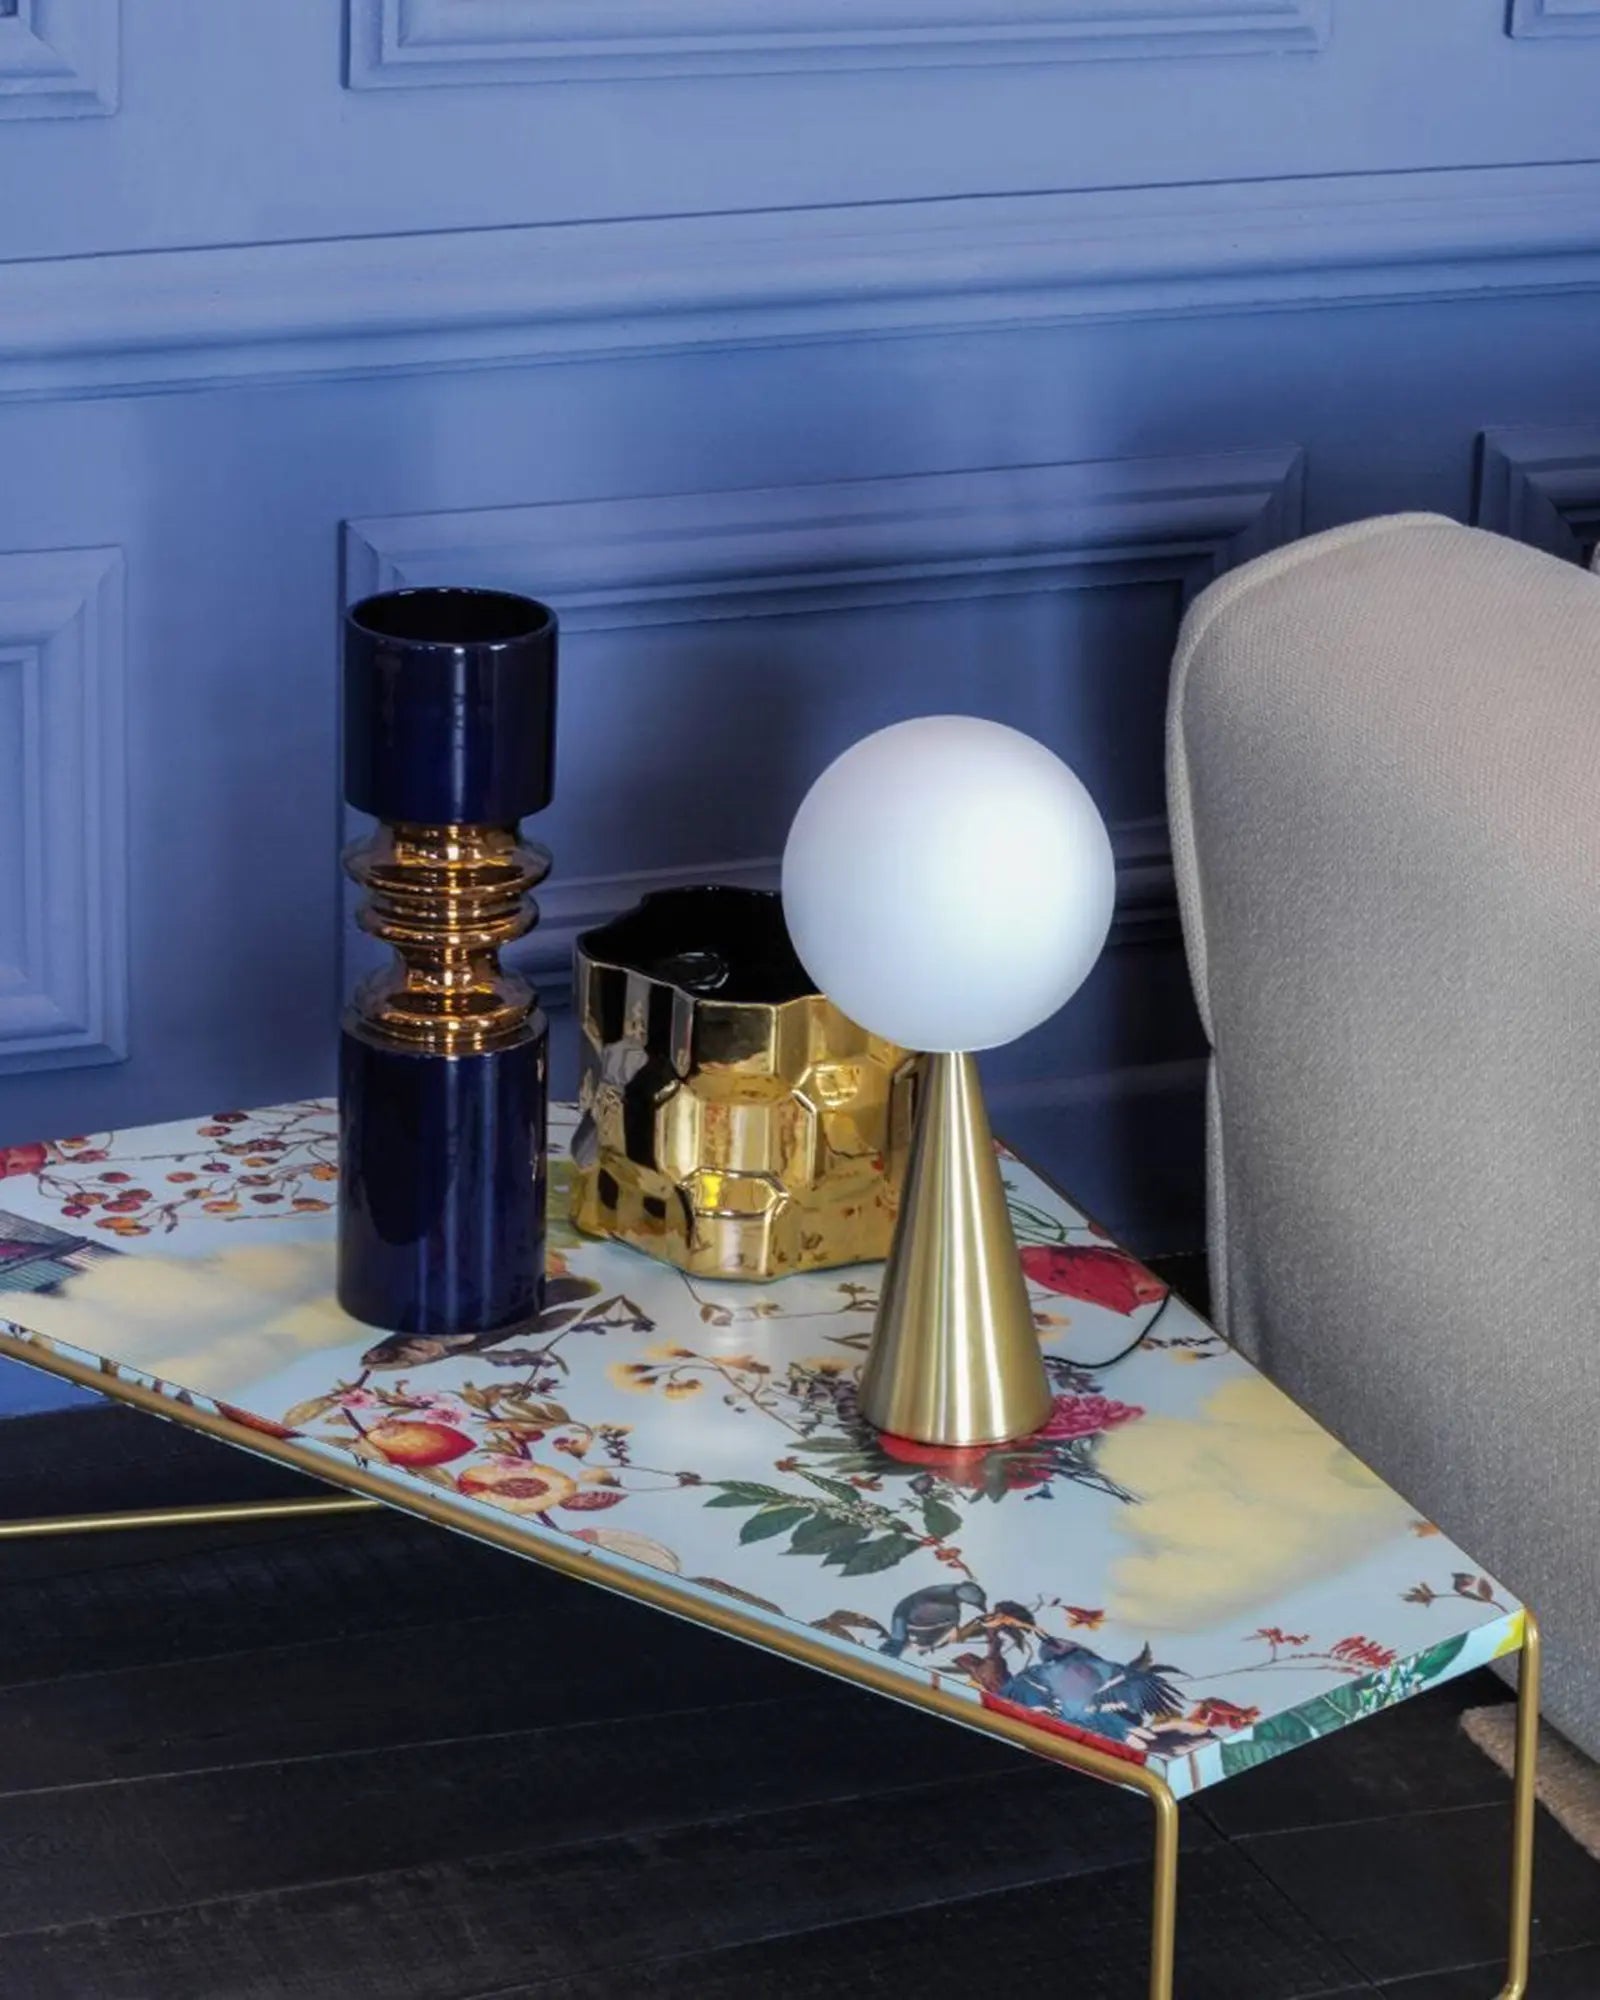 Bilia Table lamp on a coffee table